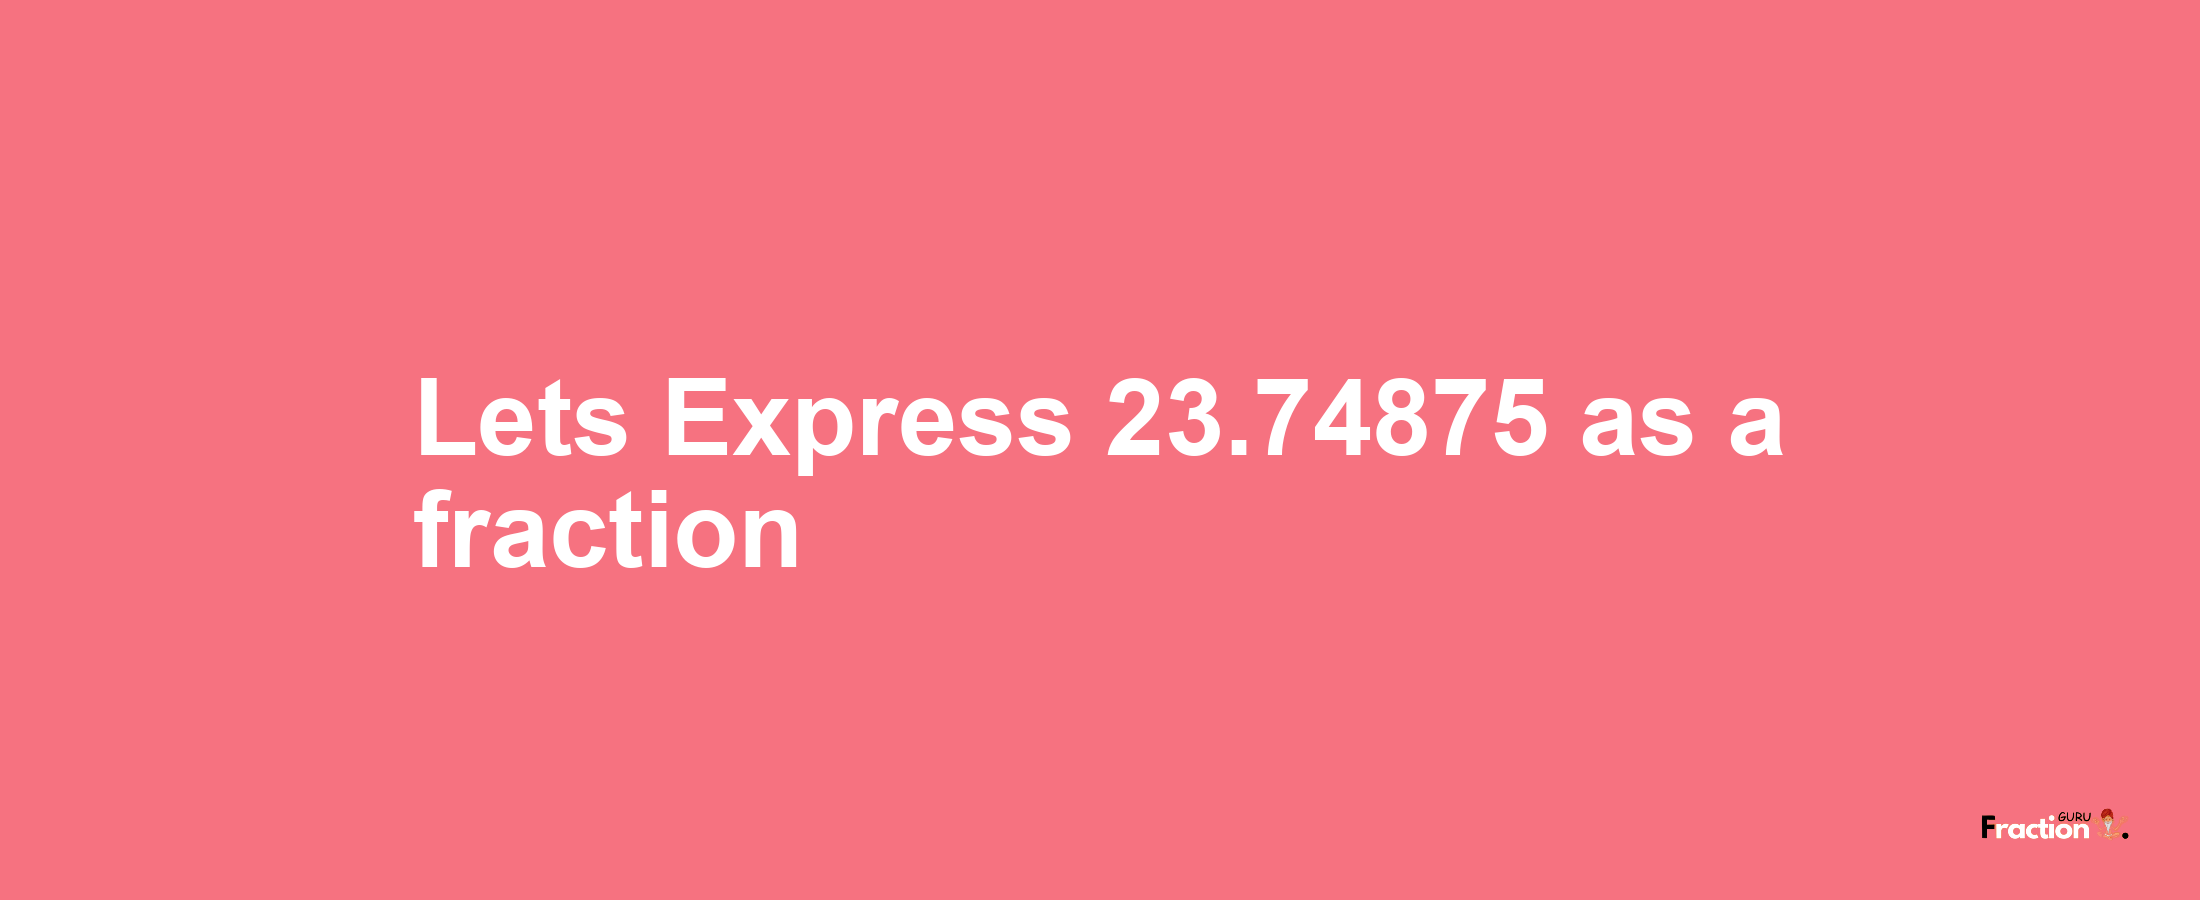 Lets Express 23.74875 as afraction